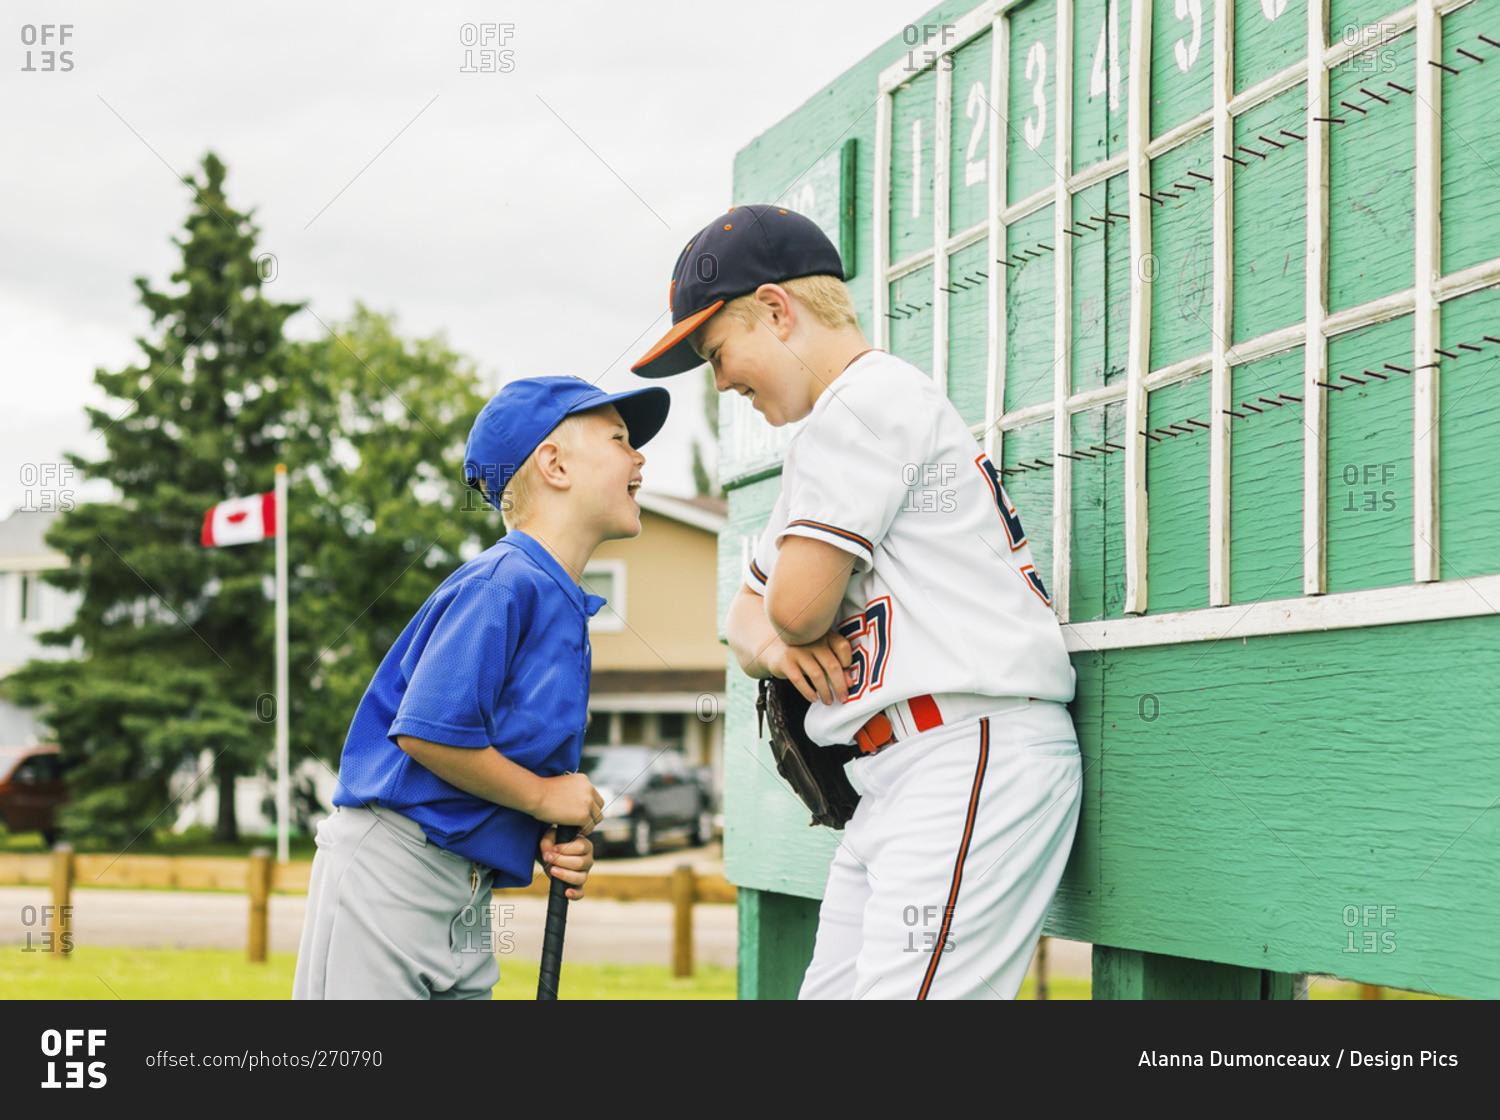 Two boys in baseball uniforms playfully argue in front of the scoreboard during a baseball game at a sports field, Fort McMurray, Alberta, Canada